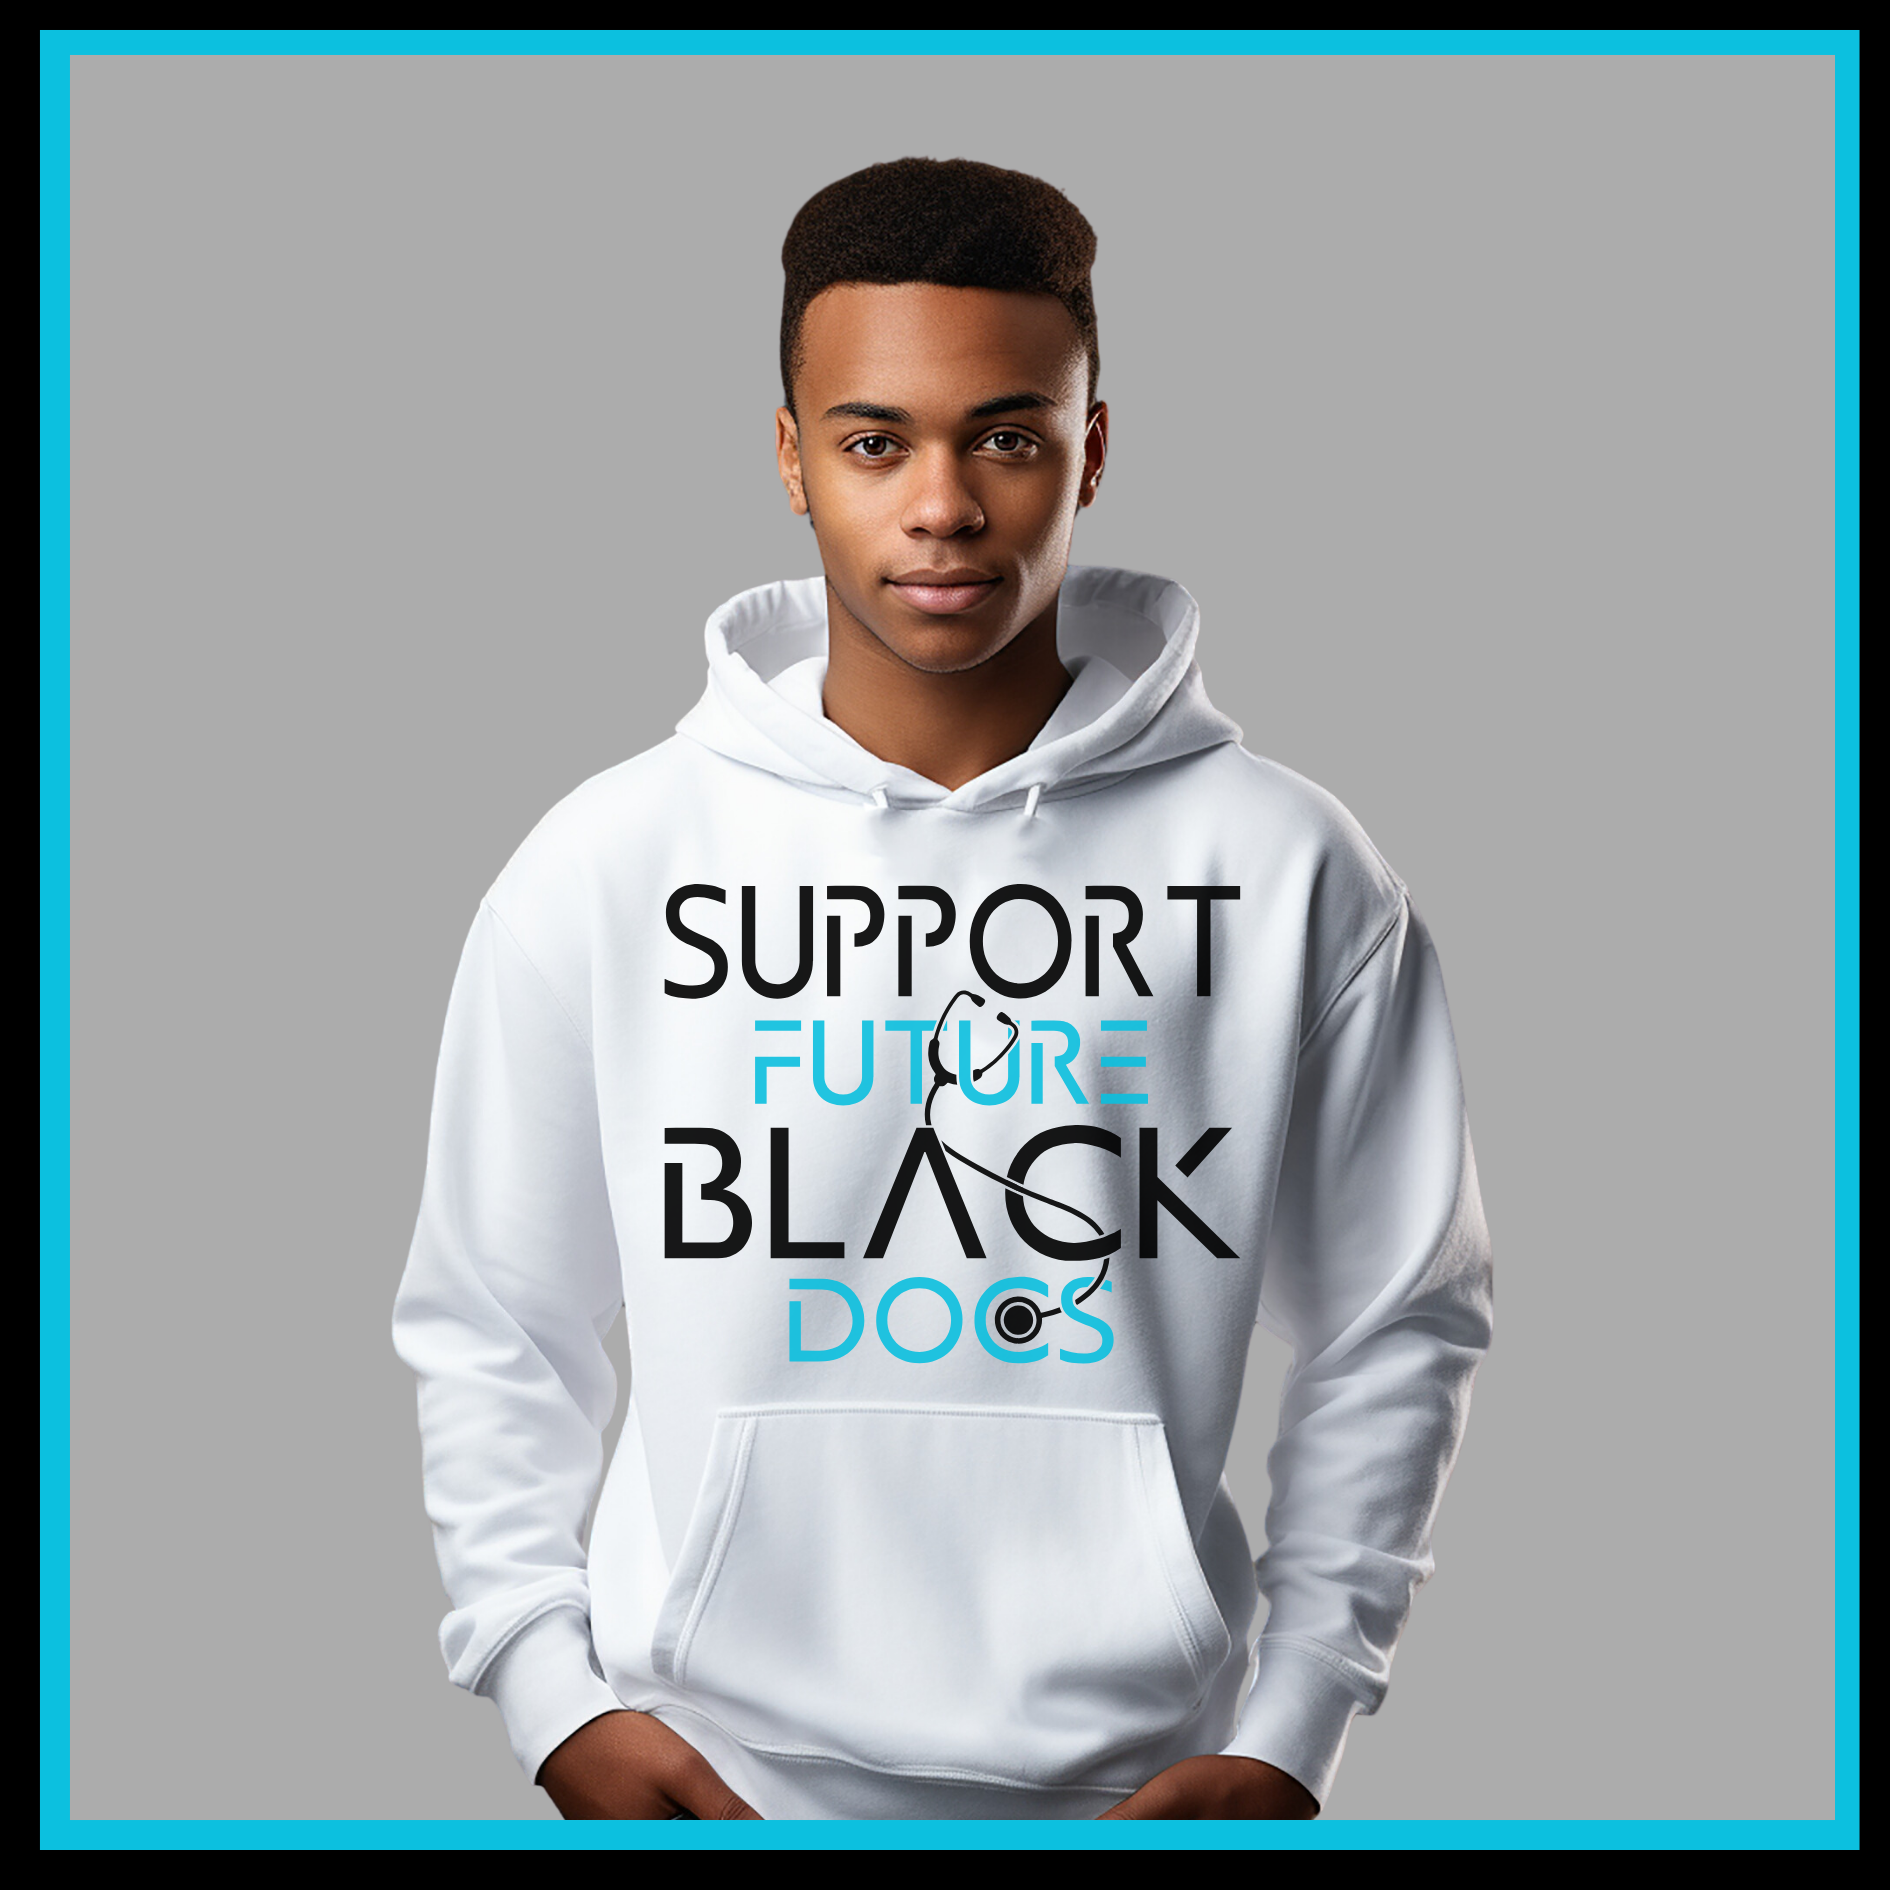 White Hoodie showcasing Support Future Black Doctors design, advocating for the future success of aspiring black medical professionals.